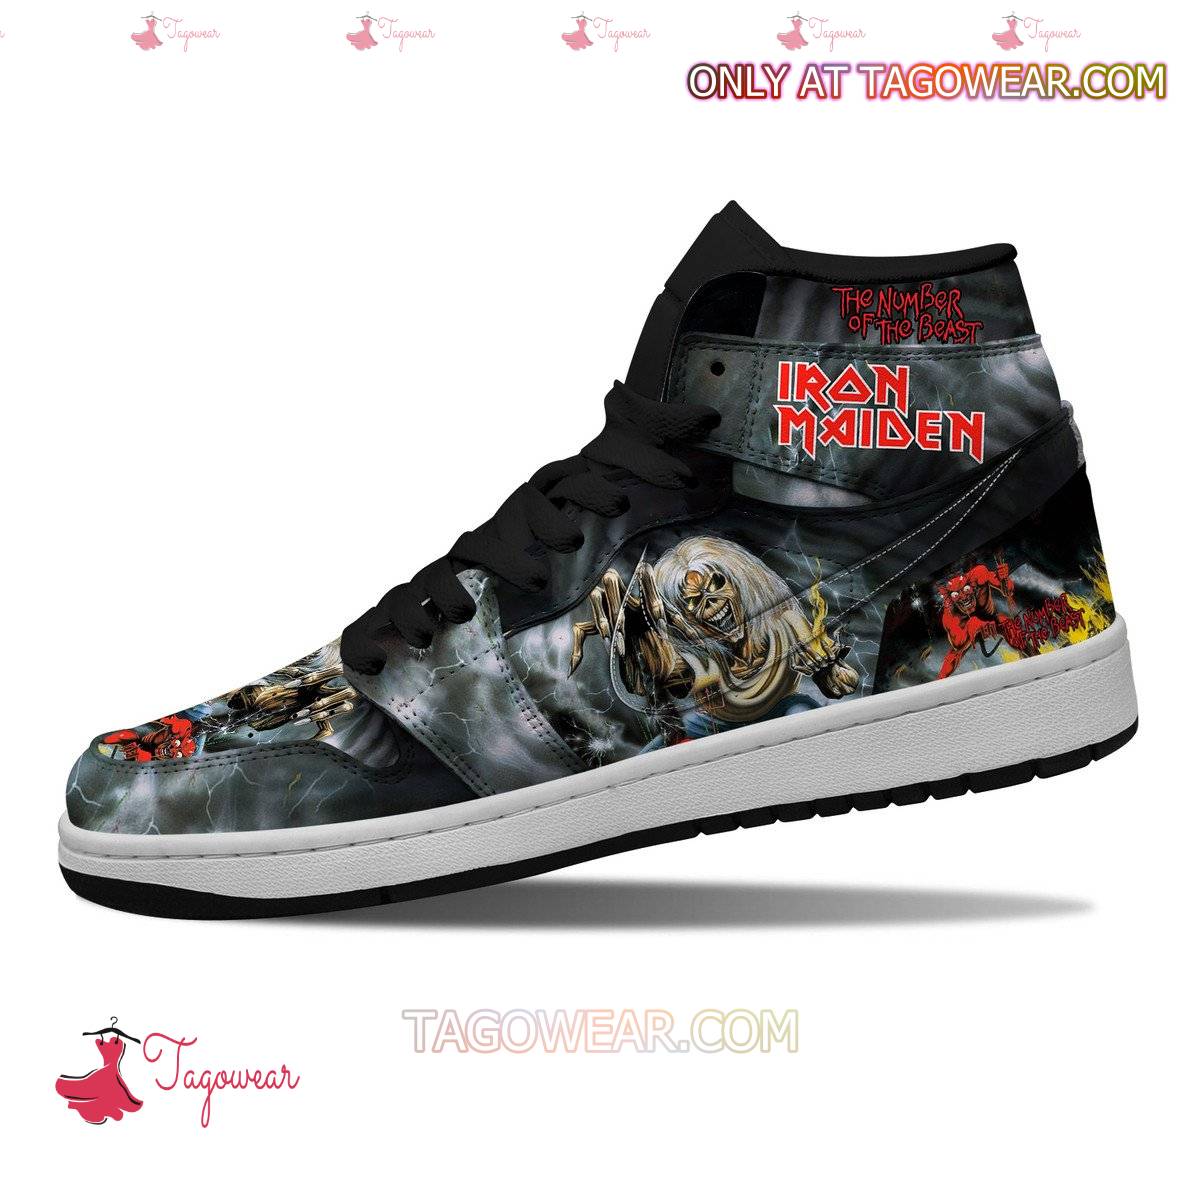 Iron Maiden The Number Of The Beast Air Jordan High Top Shoes b